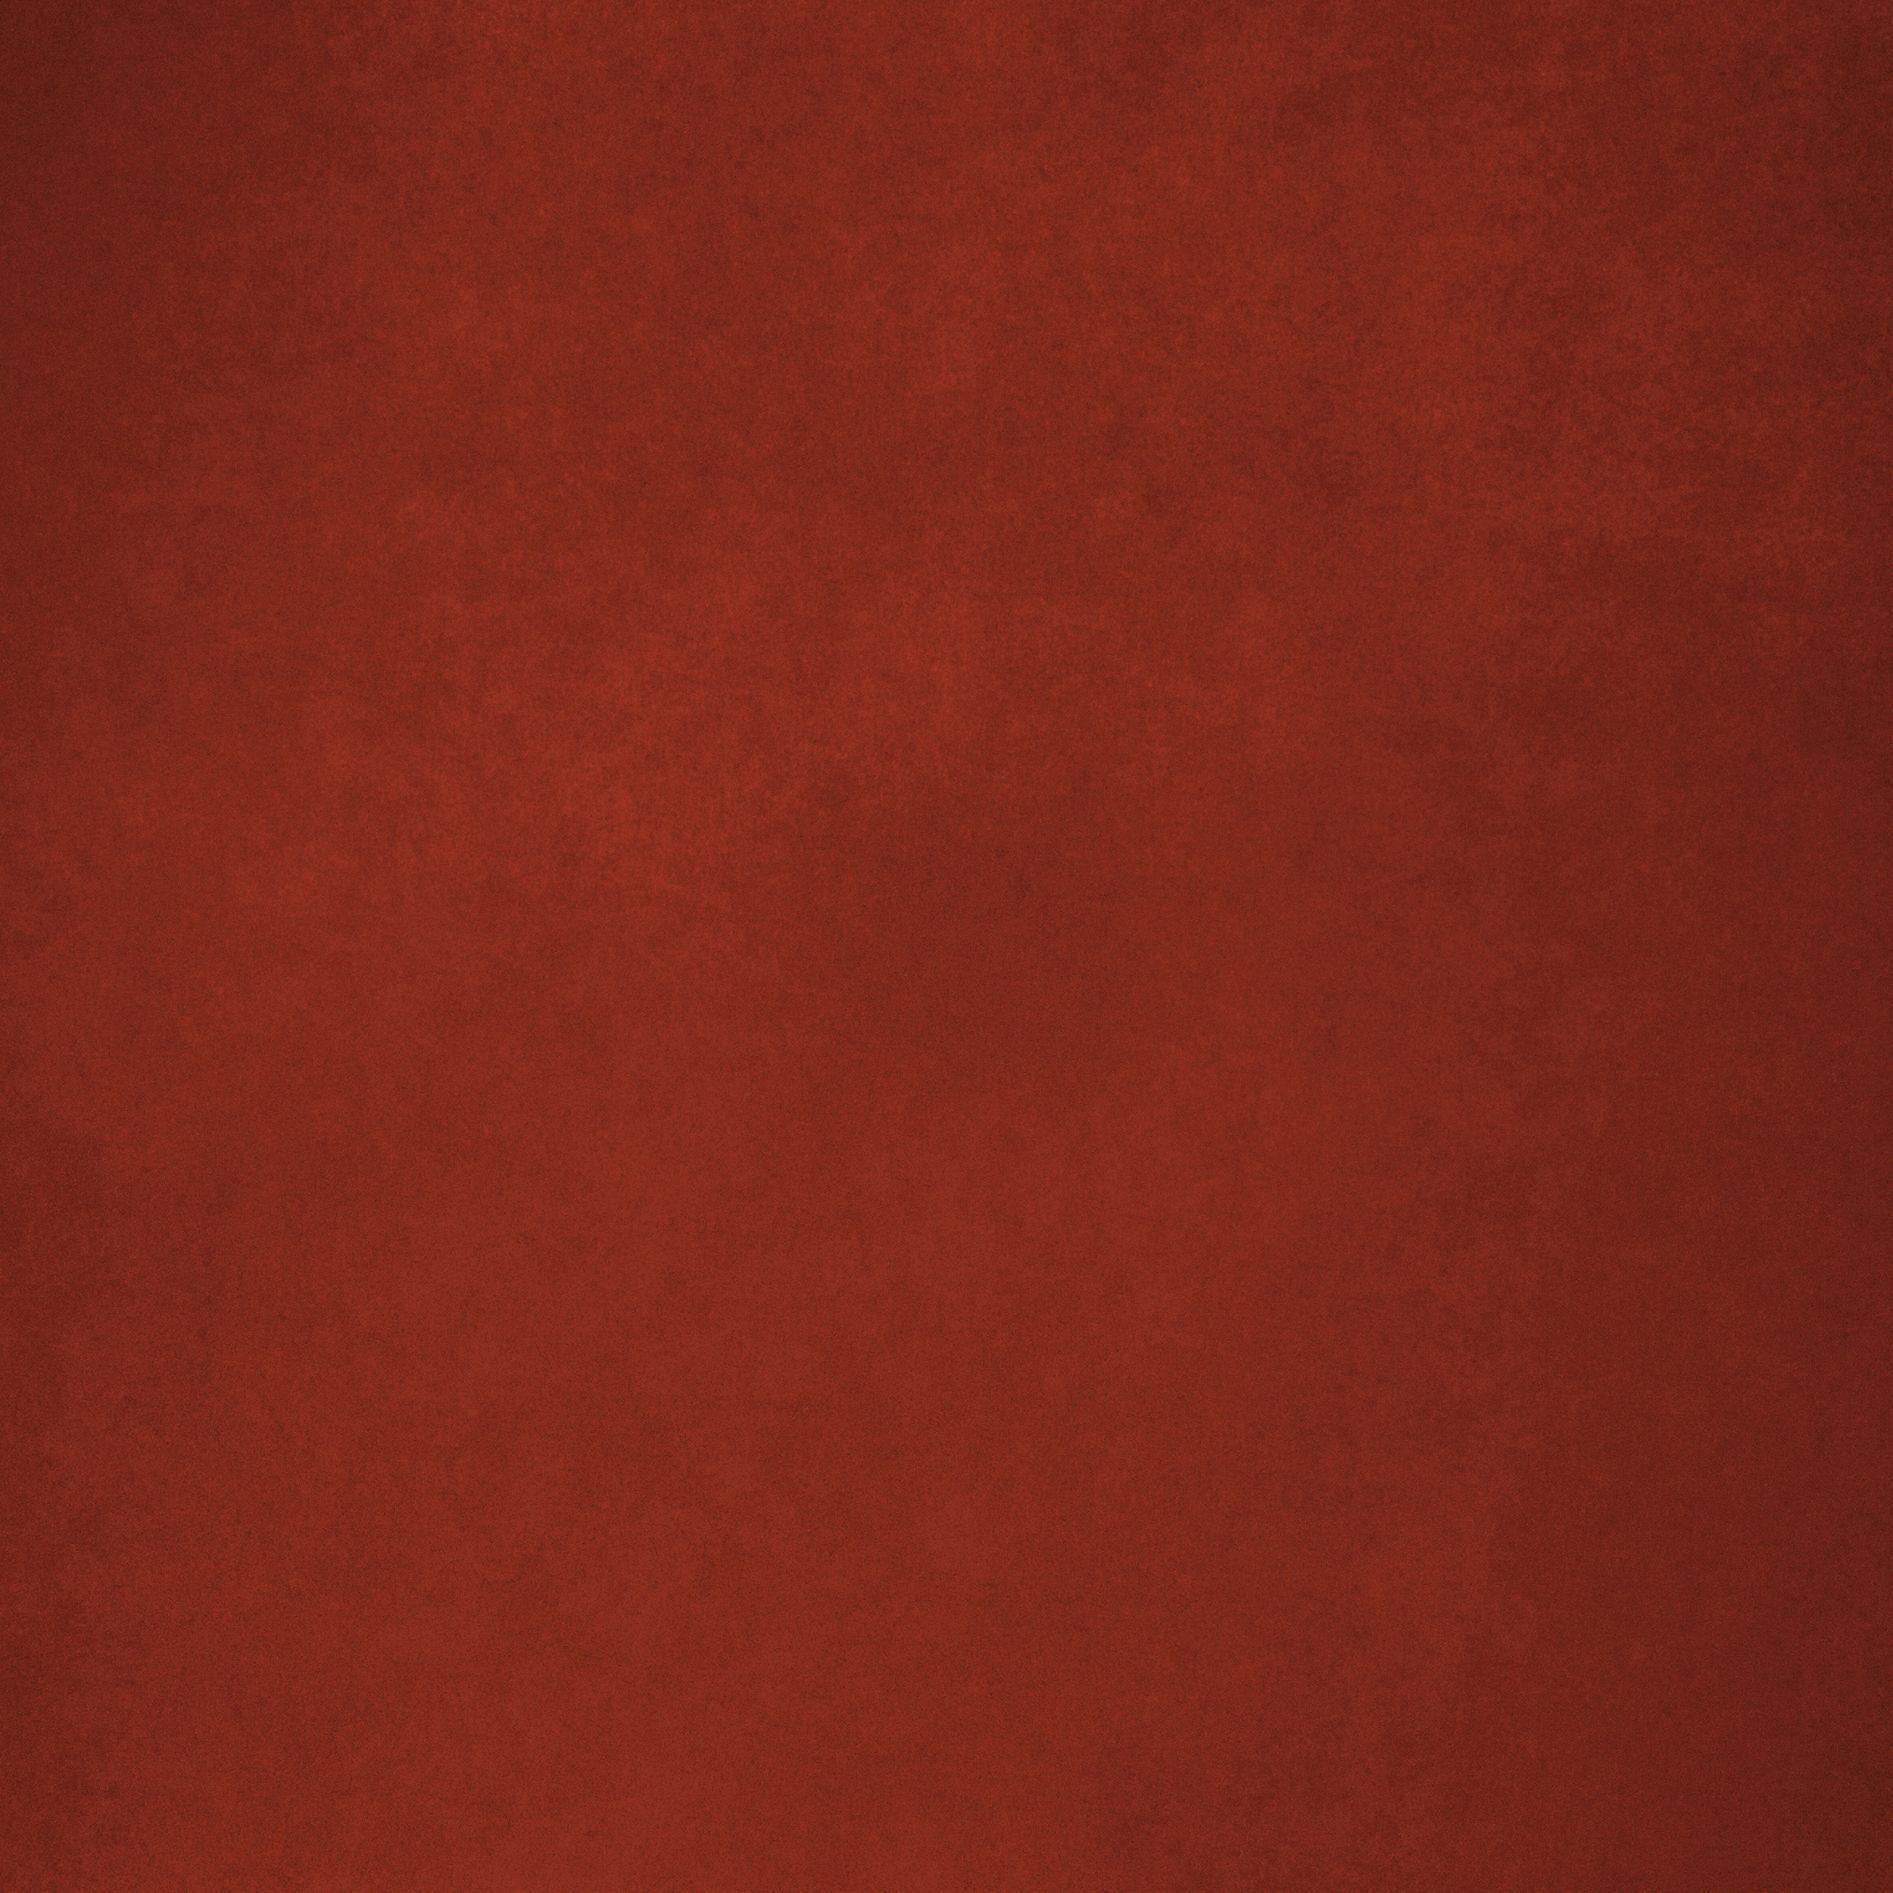 Blank Red Background Blank